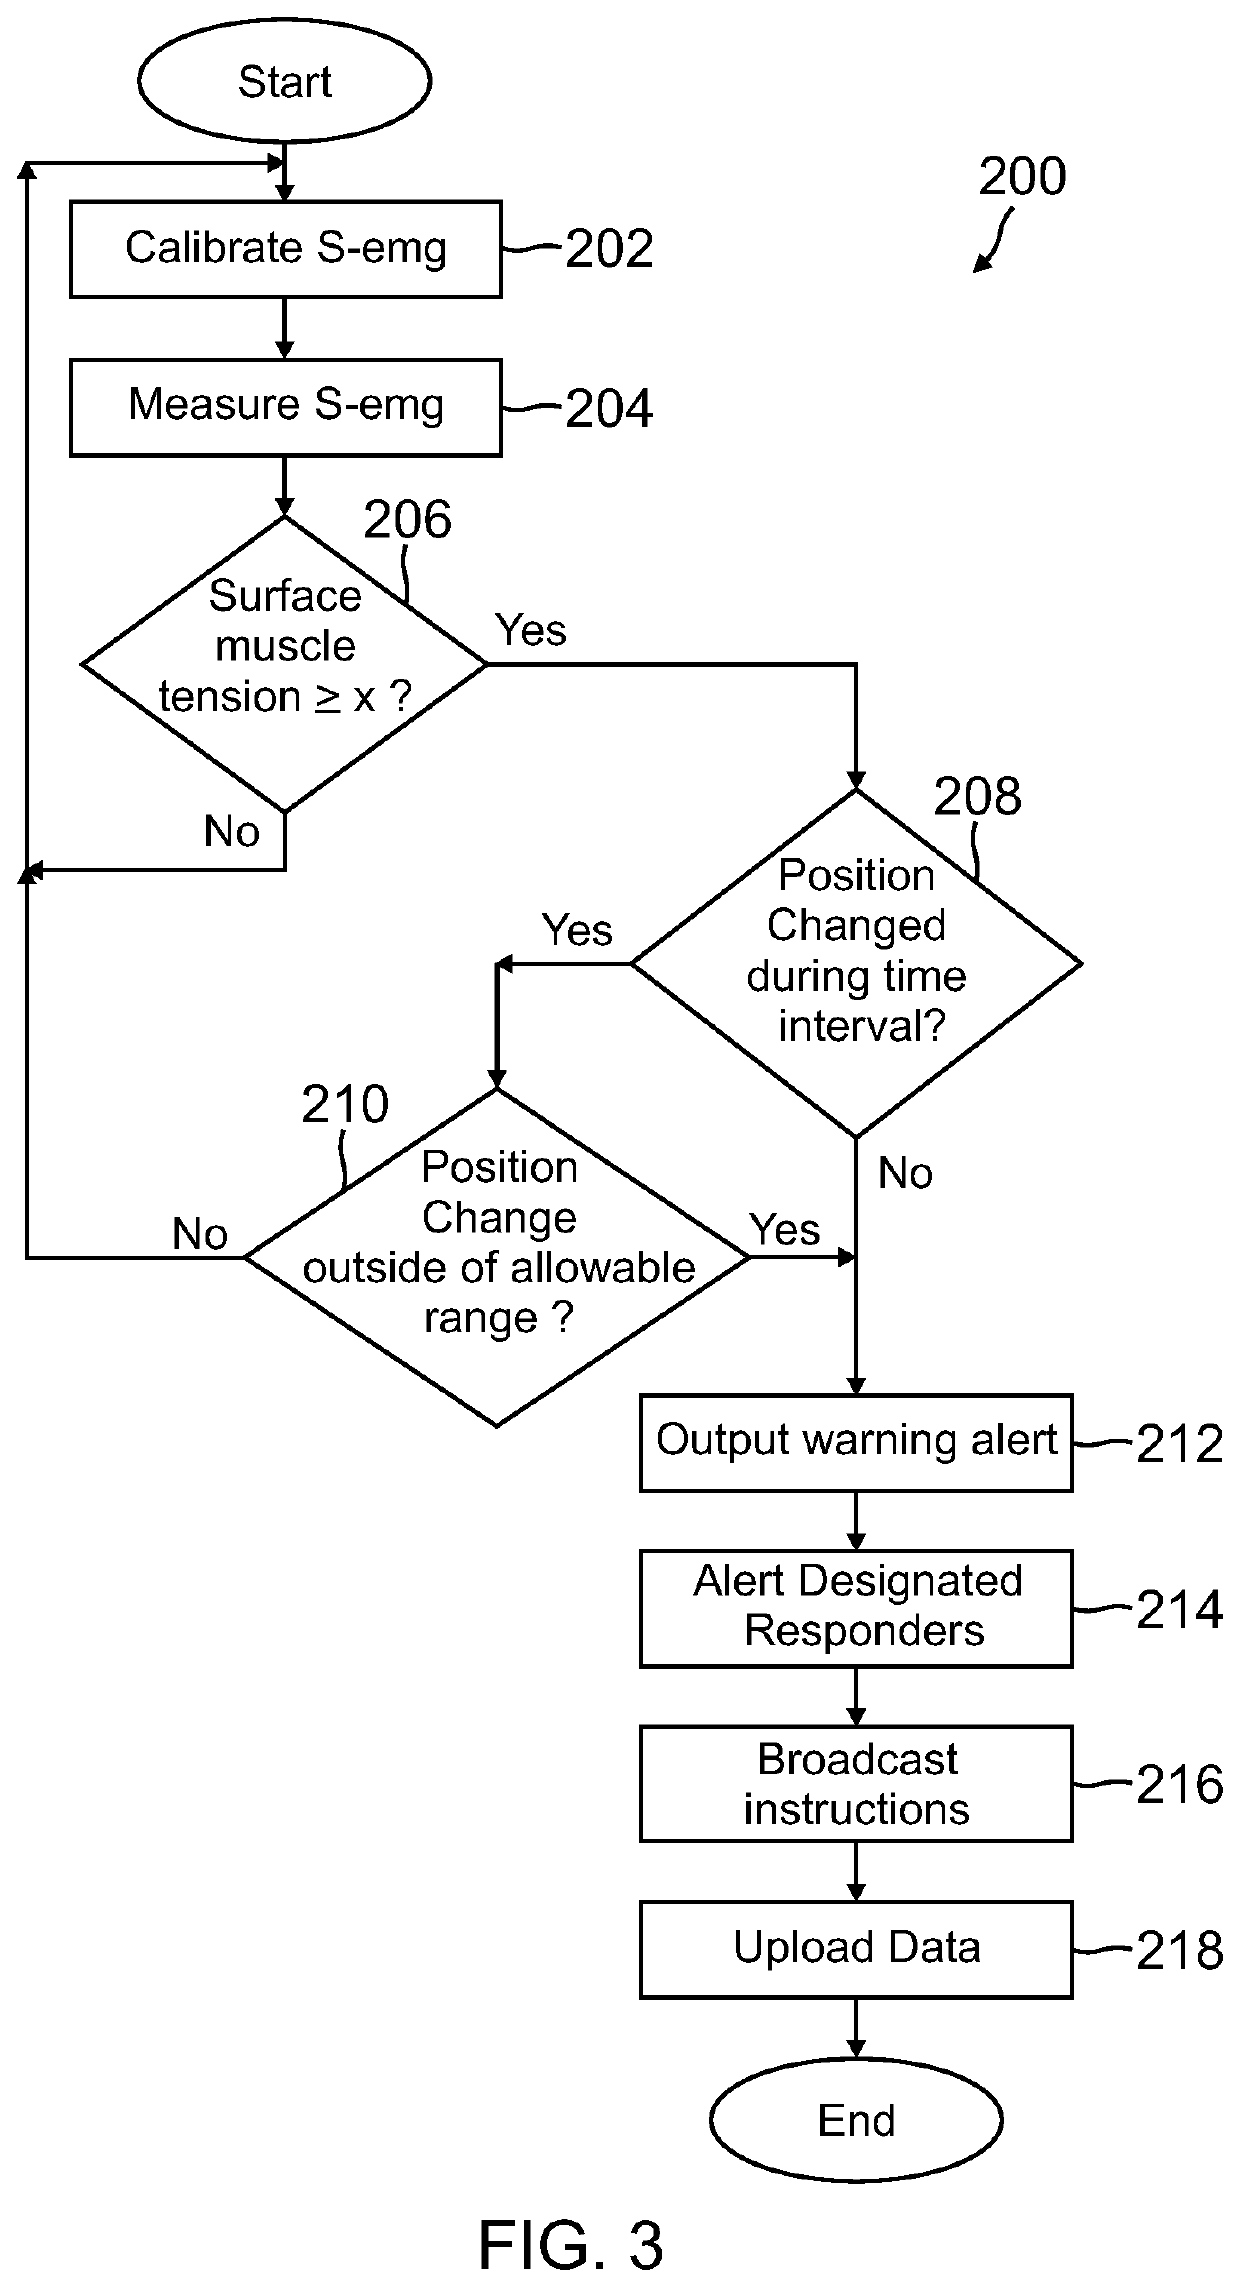 Method for prediction, detection, monitoring, analysis and alerting of seizures and other potentially injurious or life-threatening states